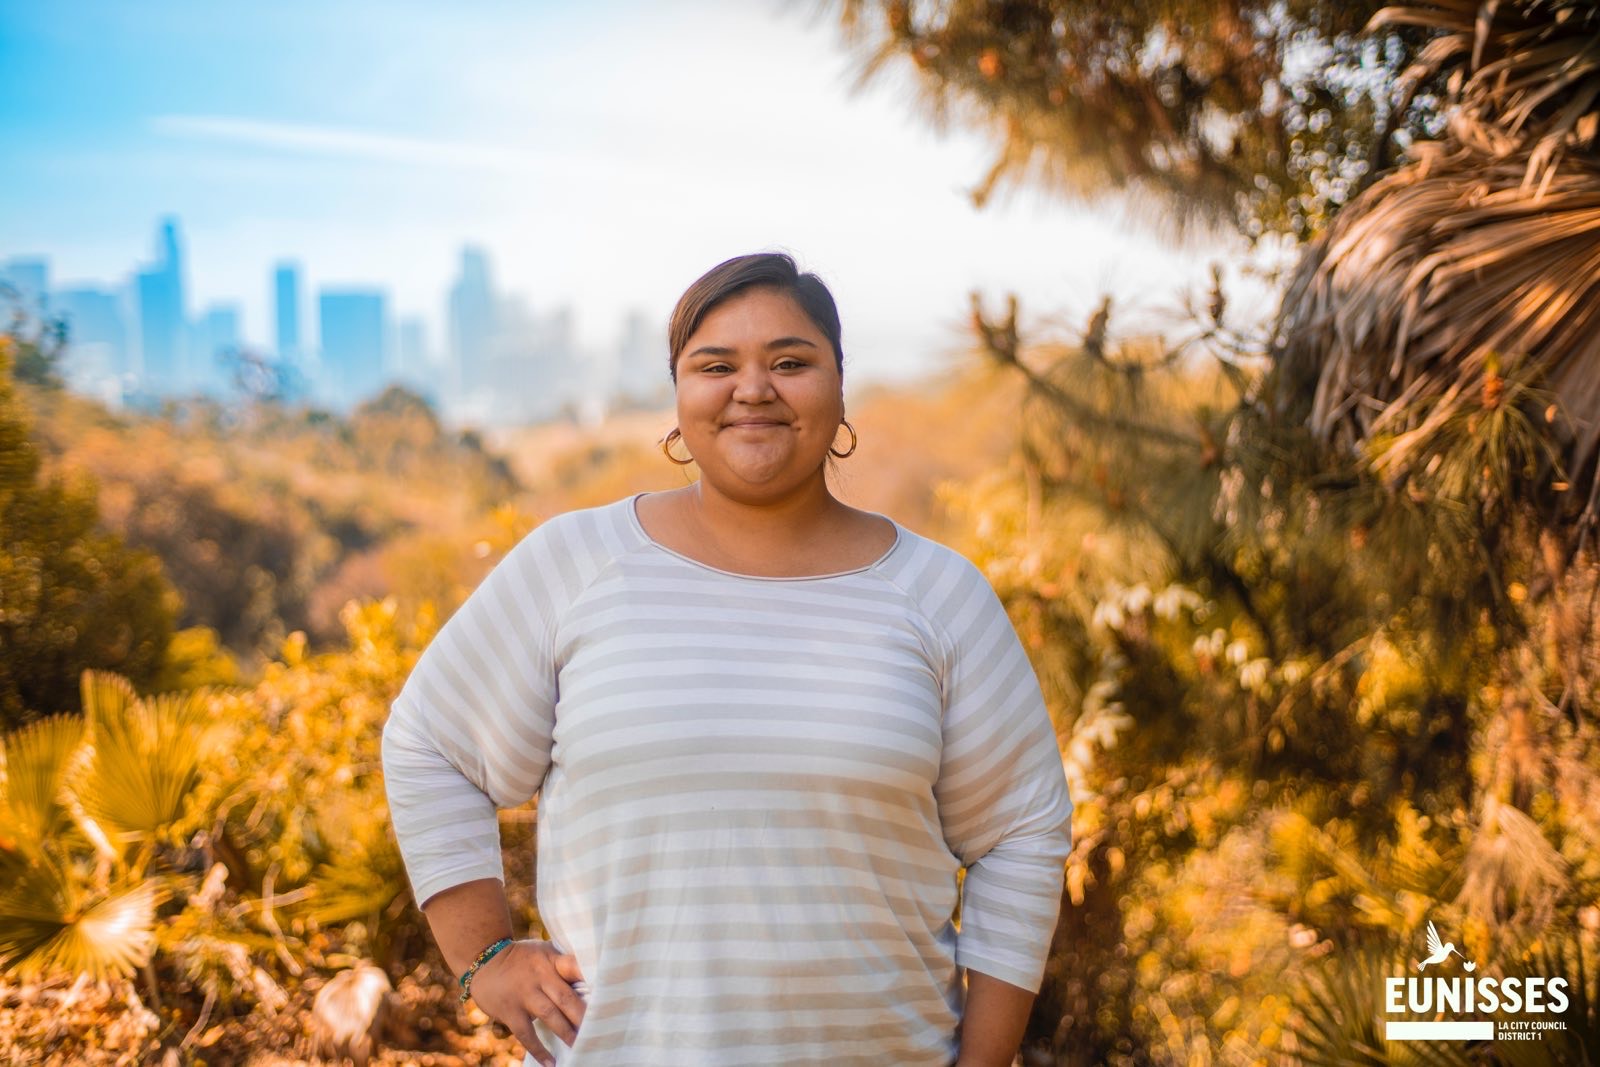 Council District One Candidate Eunisses Hernandez is standing in a softly lit chaparral with trees and bushes smiling, with downtown Los Angeles in the background and a campaign logo on the bottom right.